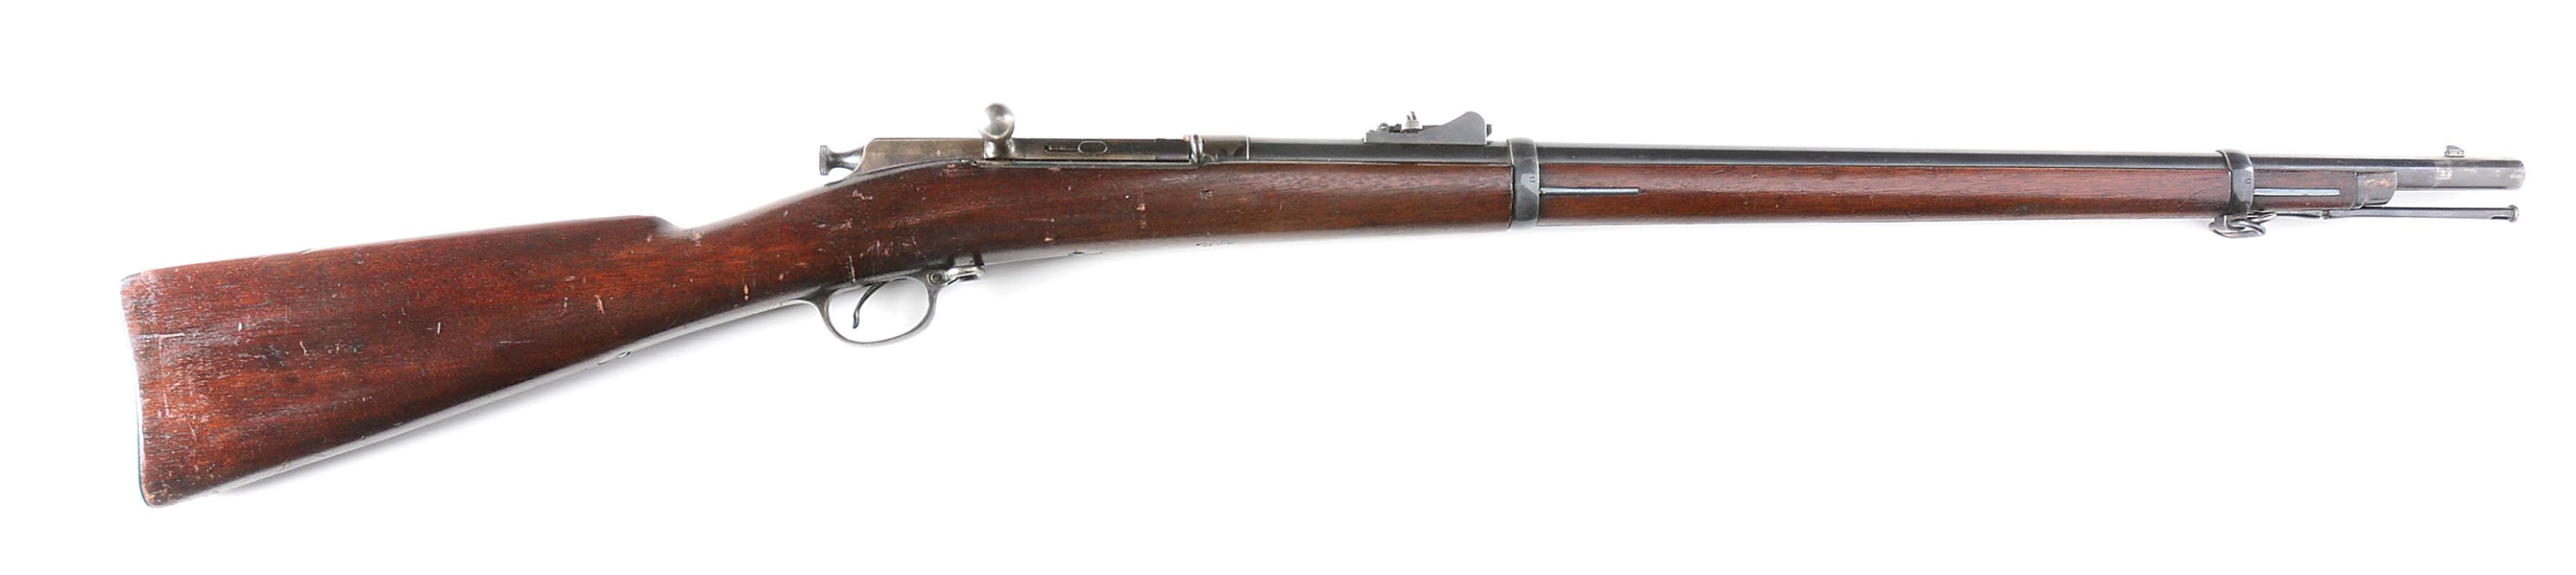 (A) MODEL 1882 US MAGAZINE RIFLE SPRINGFIELD CHAFFEE-REESE BOLT ACTION RIFLE.